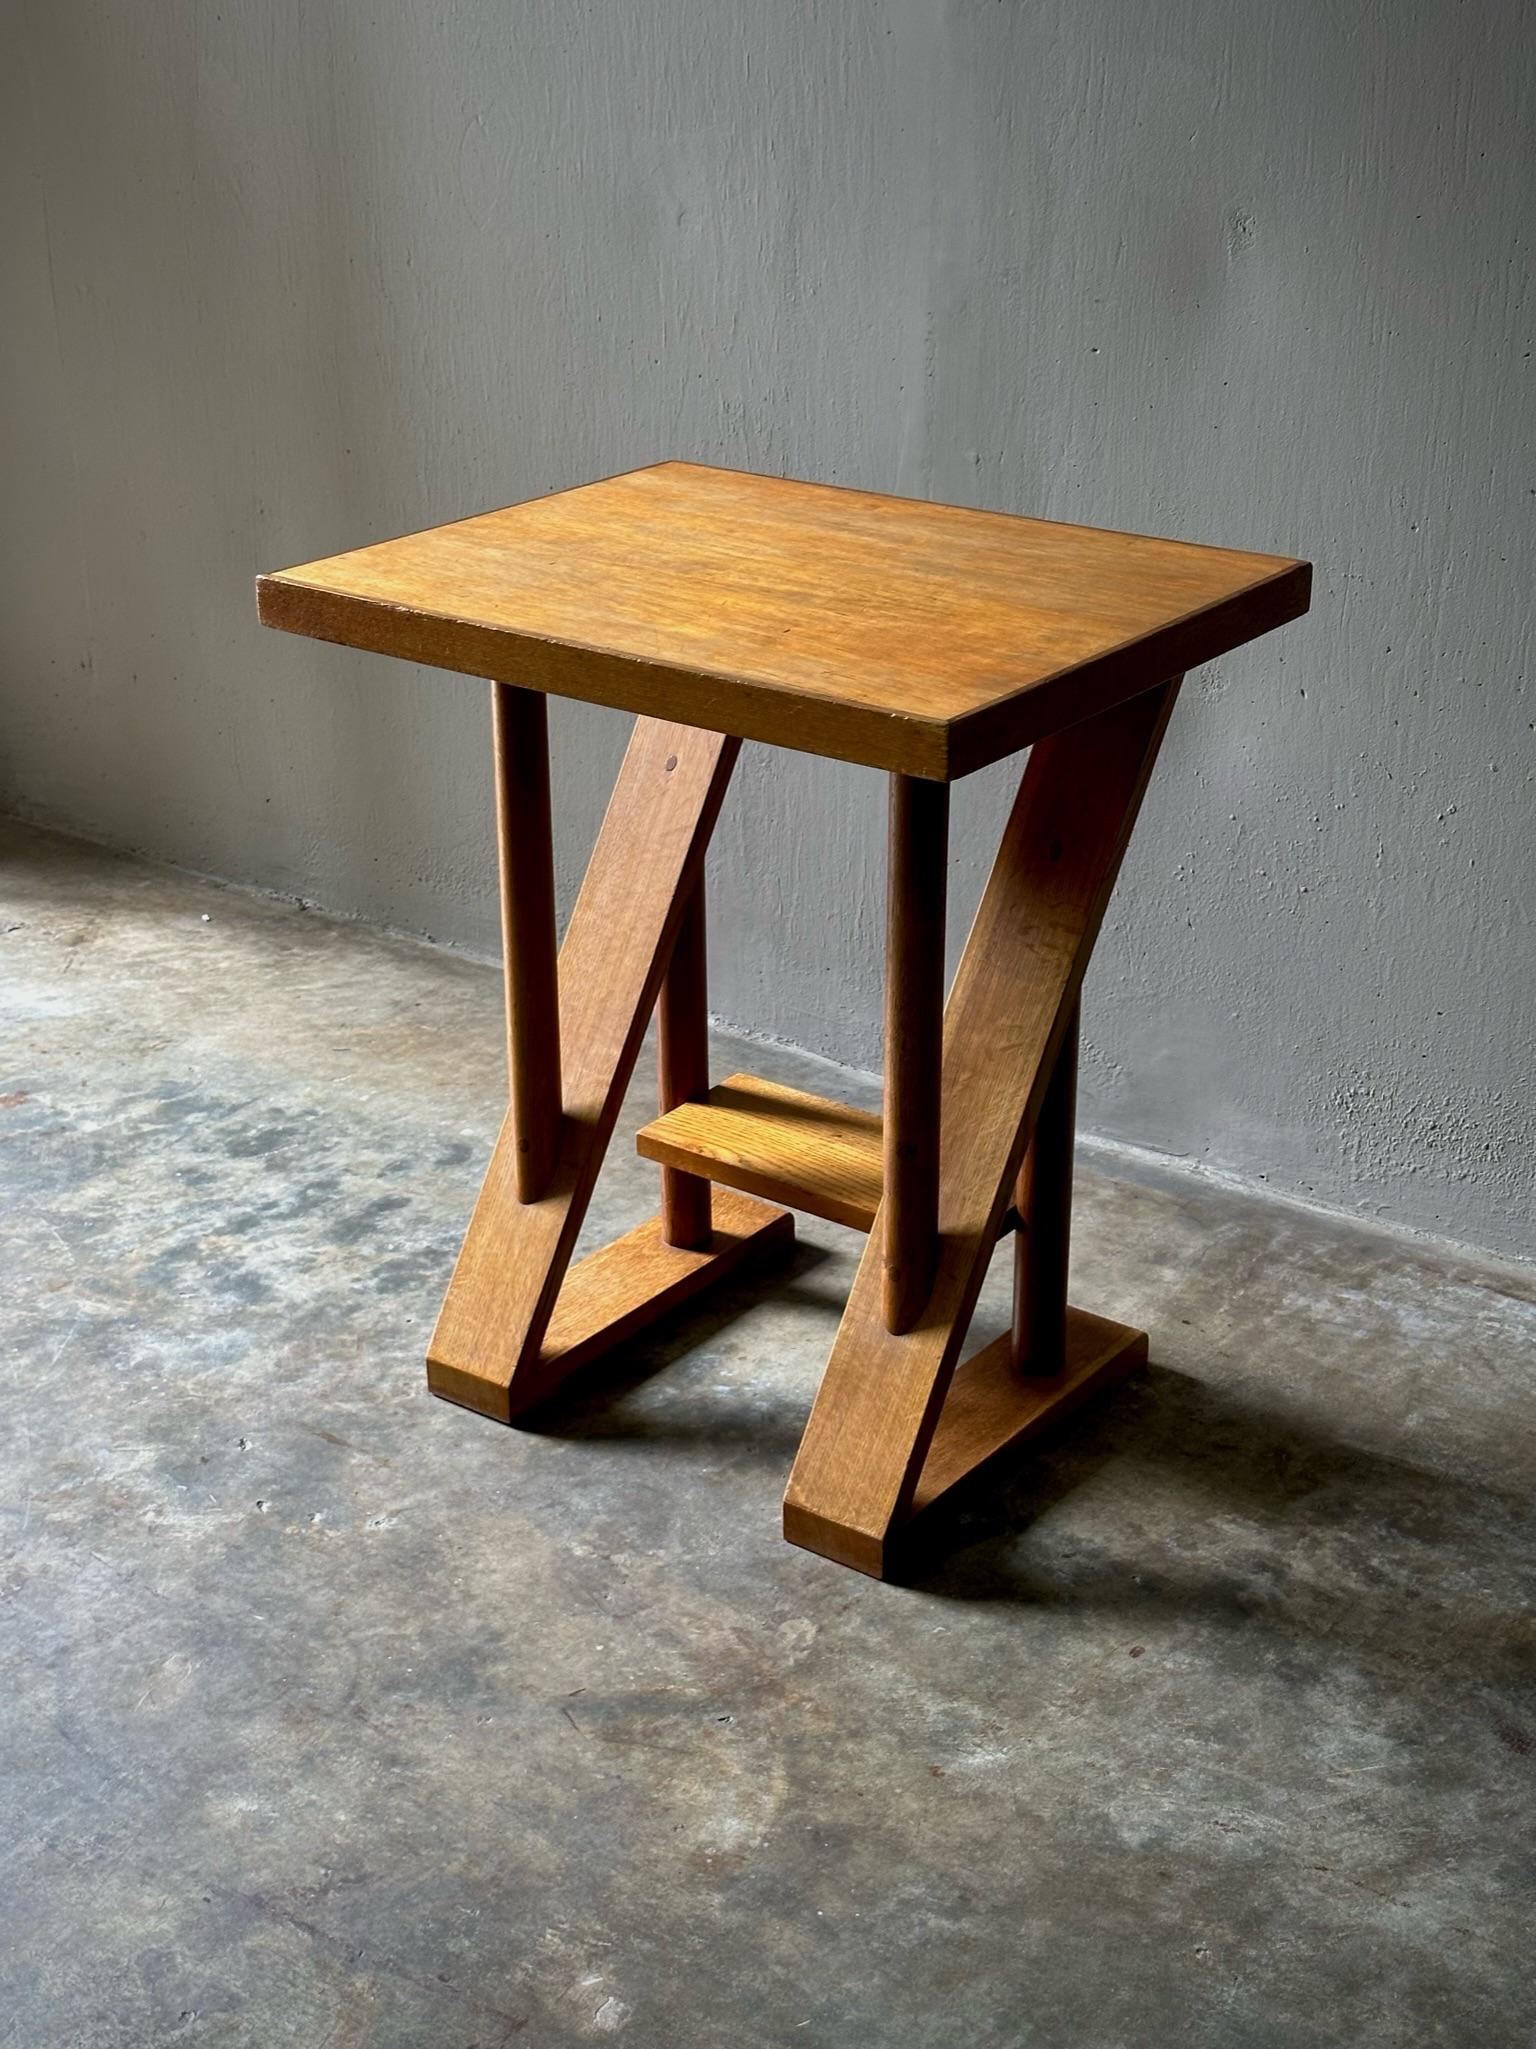 1920s Dutch modernist wood side table or writing desk with architectural zig-zag base. Minimal yet complex, with a warm, inviting patina. 

Netherlands, circa 1920

Dimensions: 24.5W x 20D x 28H